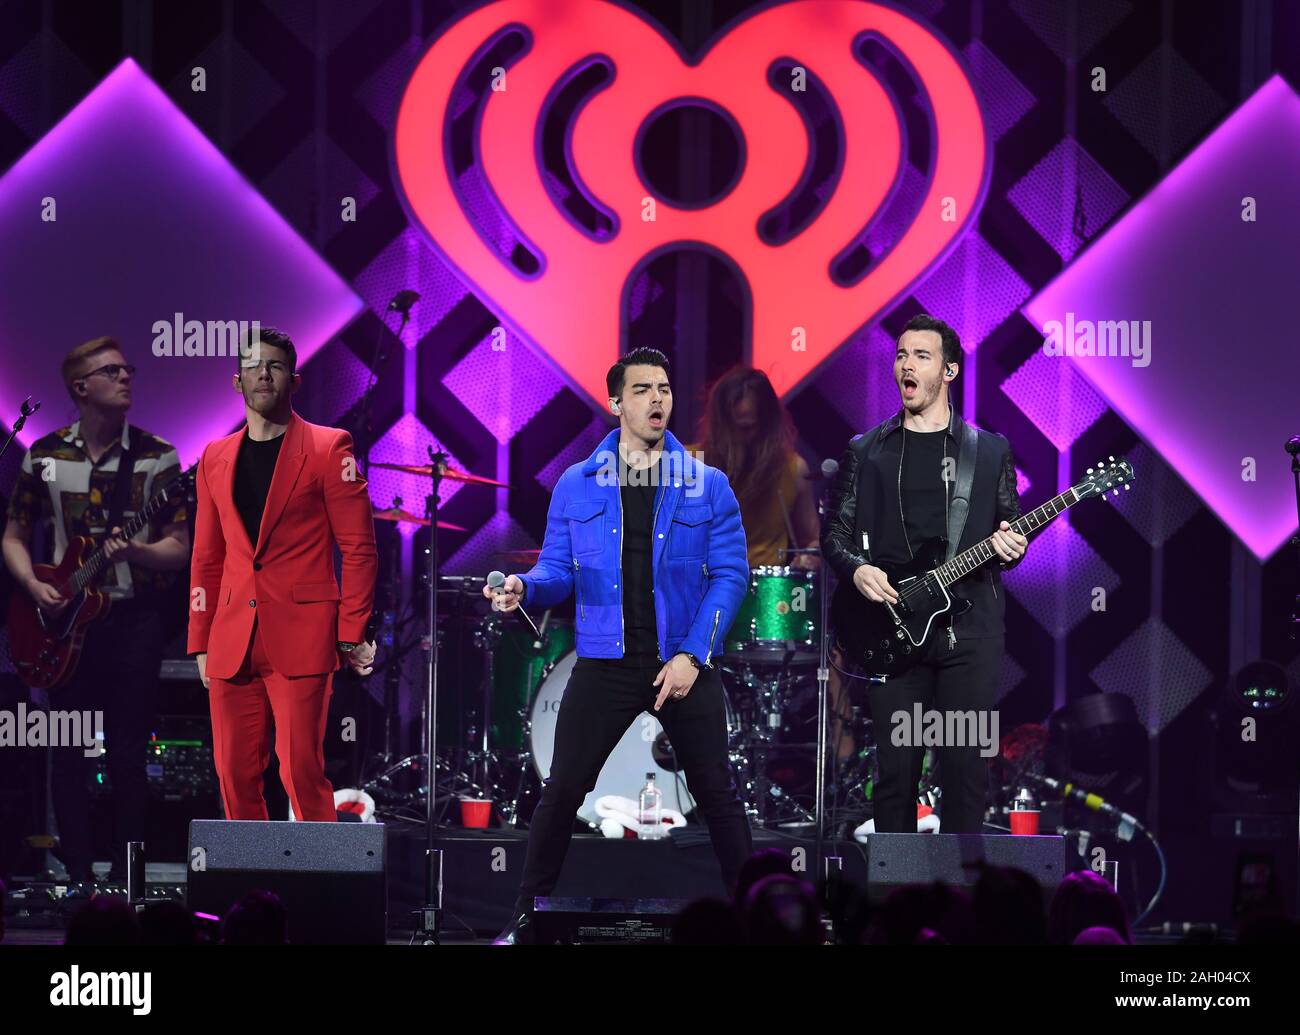 Sunrise FL, USA. 22nd Dec, 2019. The Jonas Brothers perform during Y100 Jingle Ball 2019 at The BB&T Center on December 22, 2019 in Sunrise, Florida. Credit: Mpi04/Media Punch/Alamy Live News Stock Photo